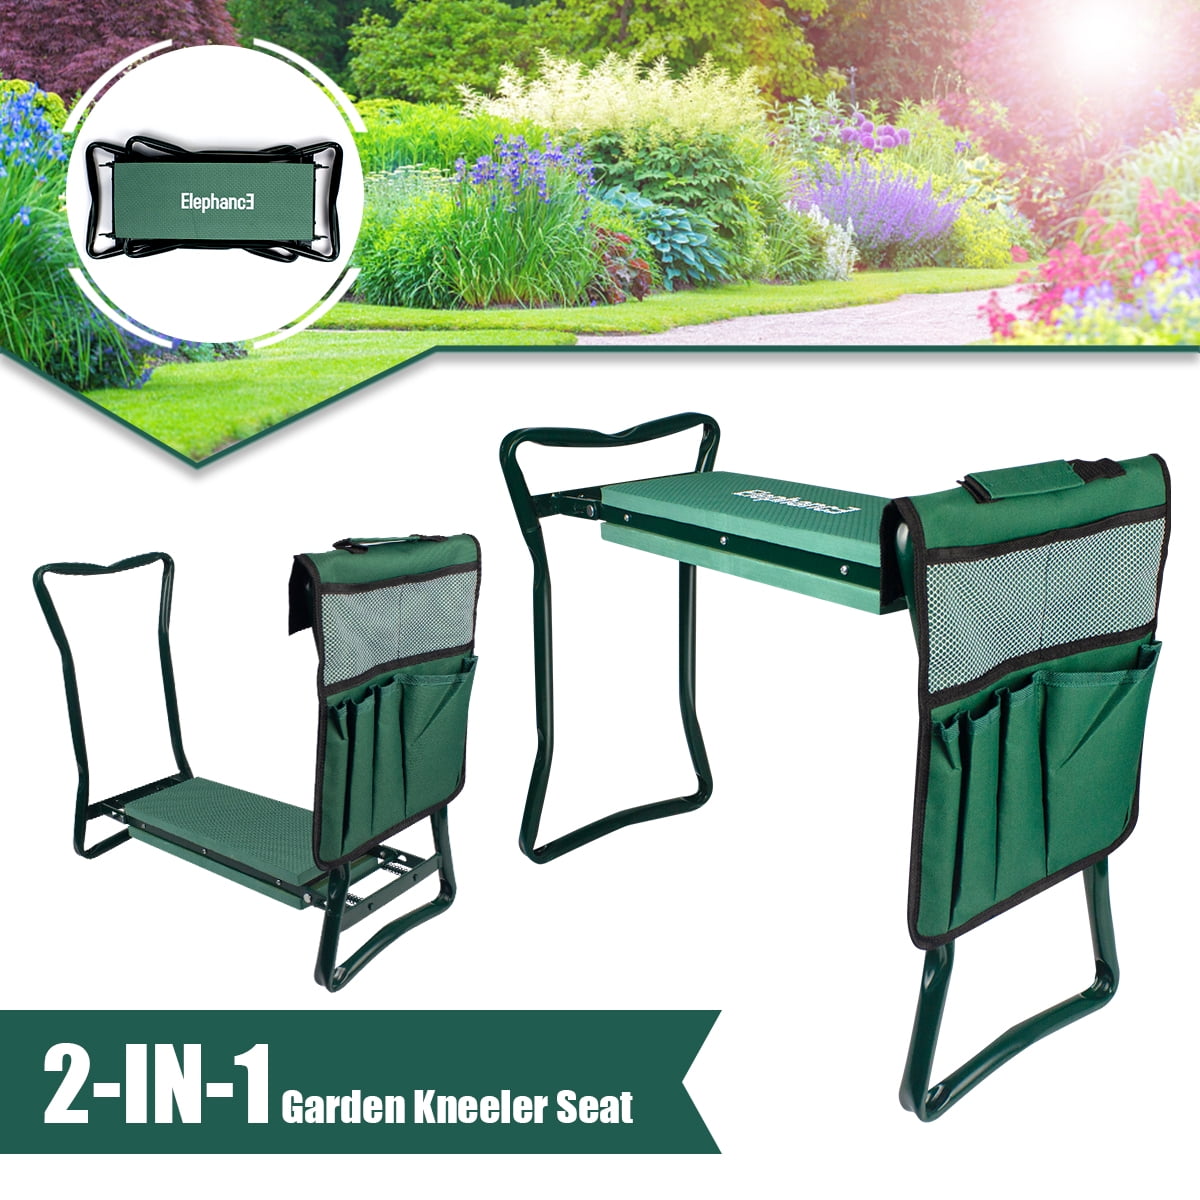 Sweetdecor Garden Foldable Kneeler and Seat with Multi-use Pouch Portable Bench Seat Stool Kneeler for Outdoor Fishing Camping 